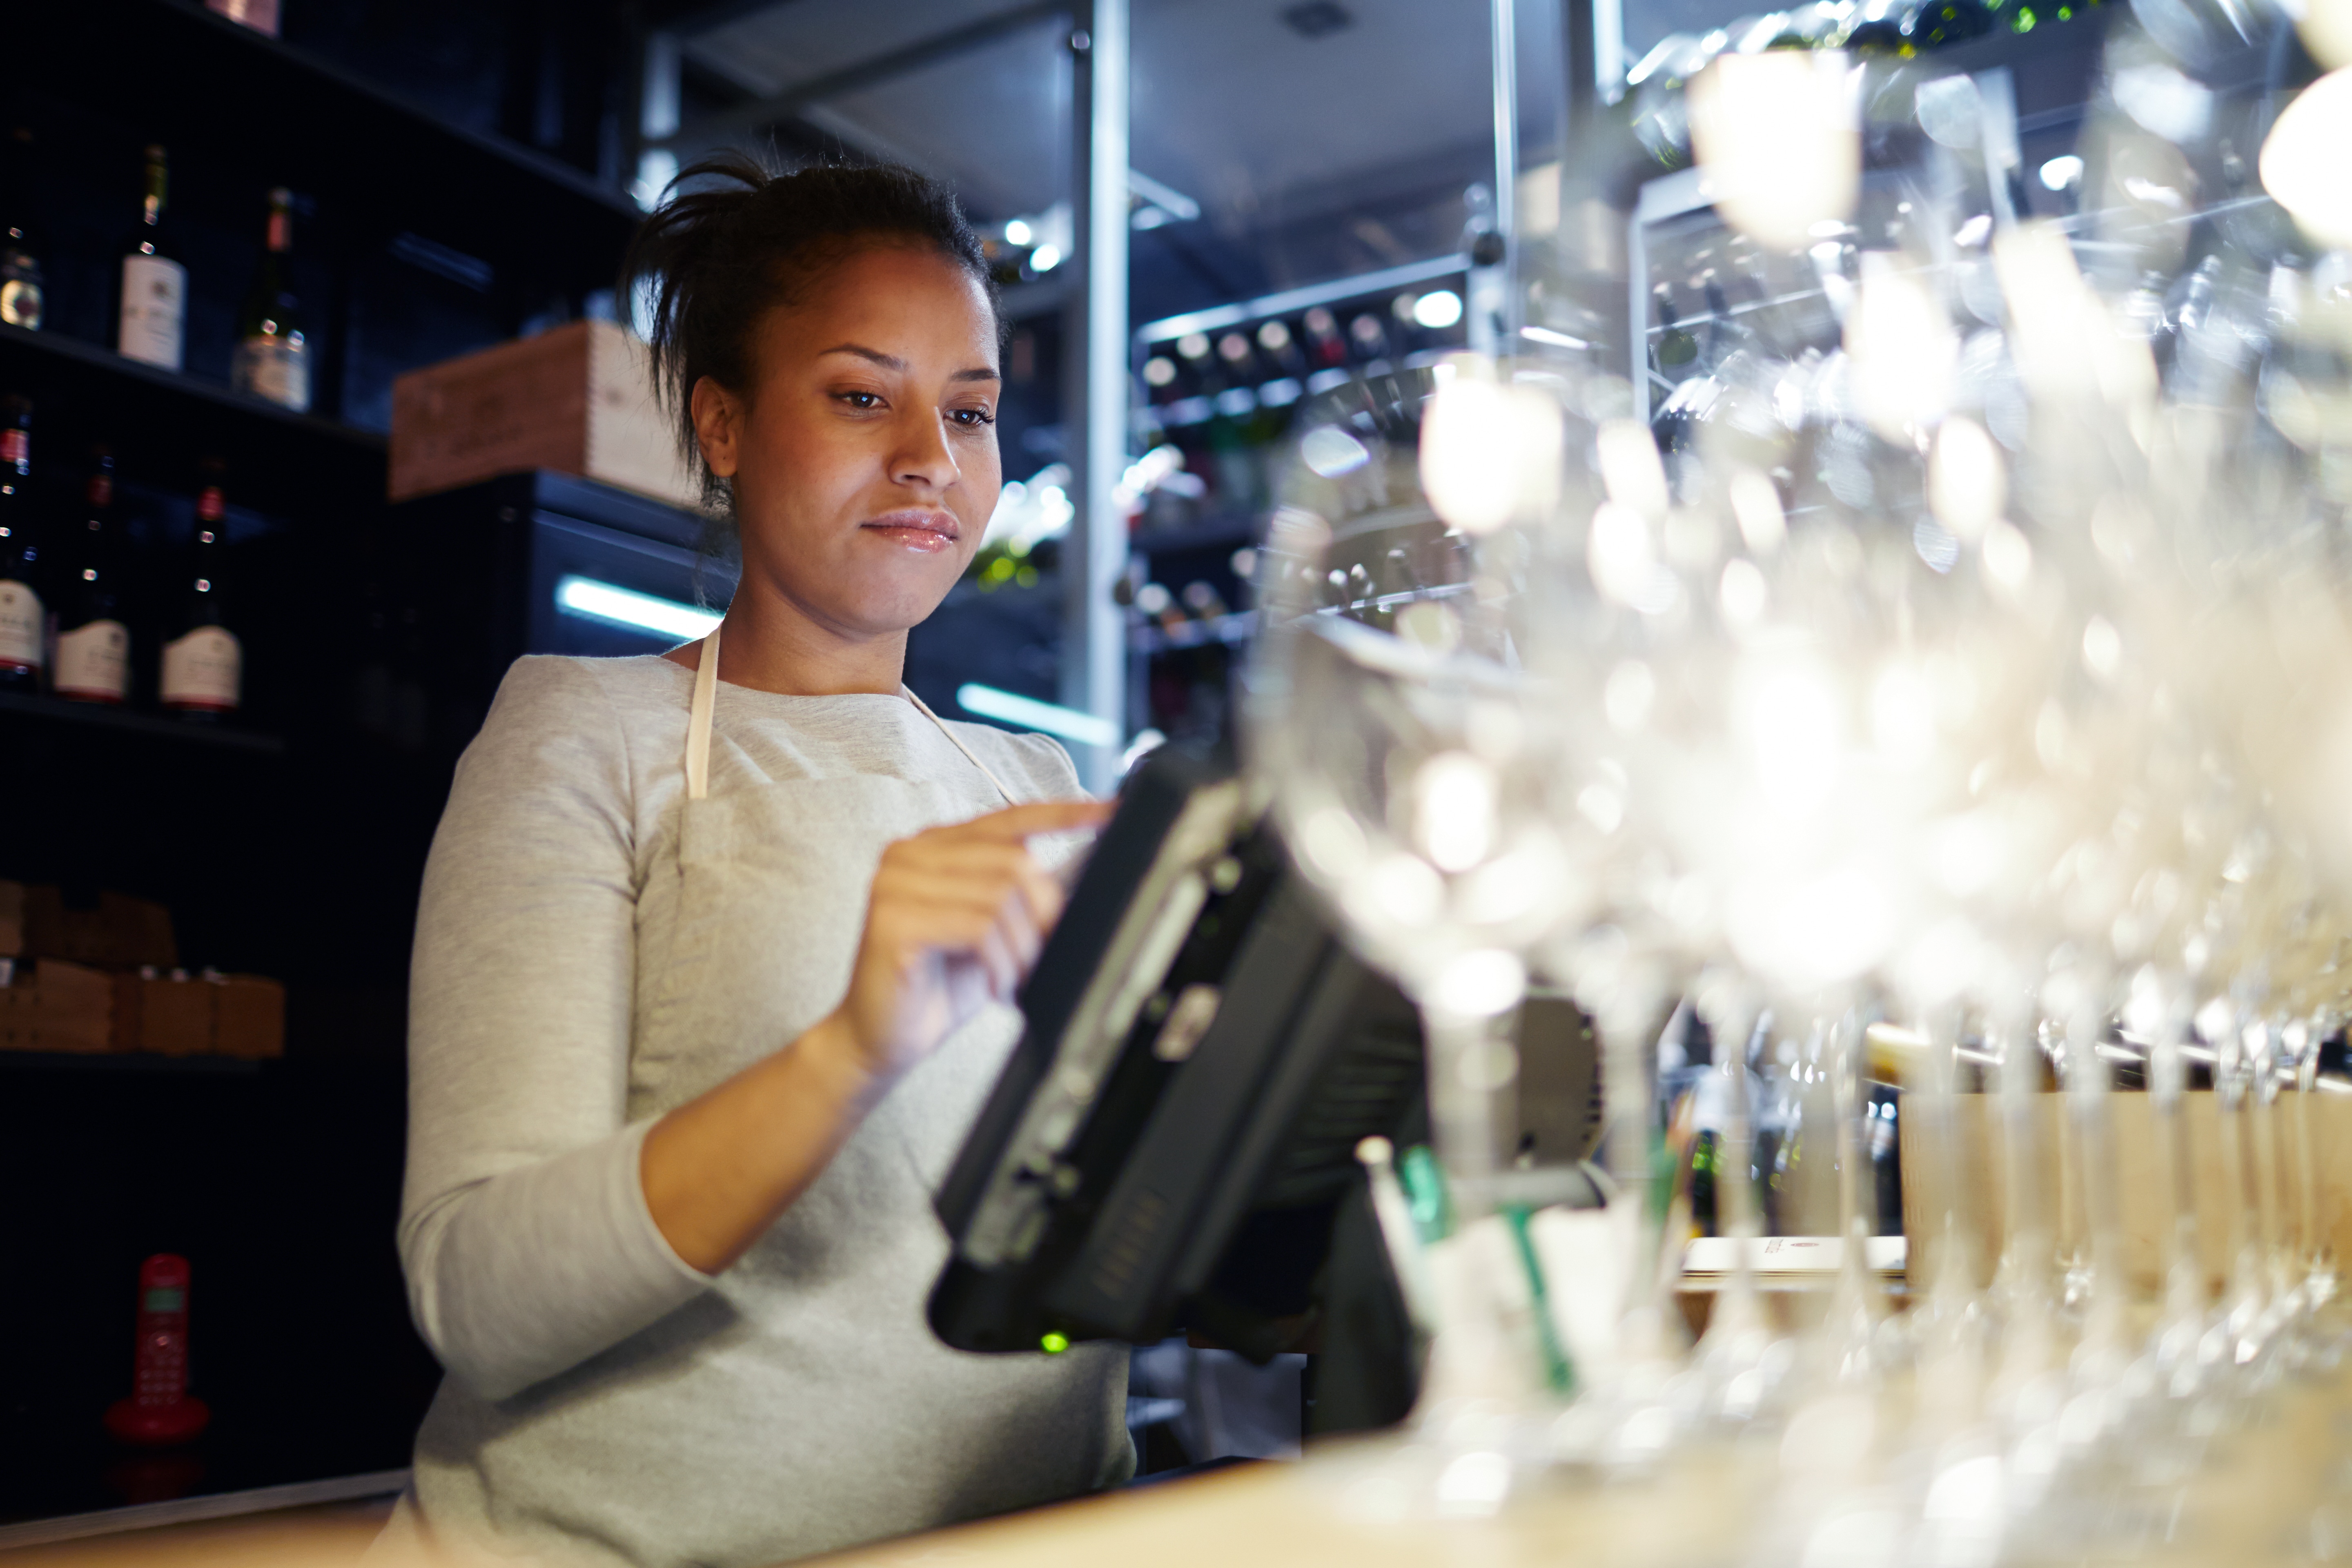 A woman is working at the bar